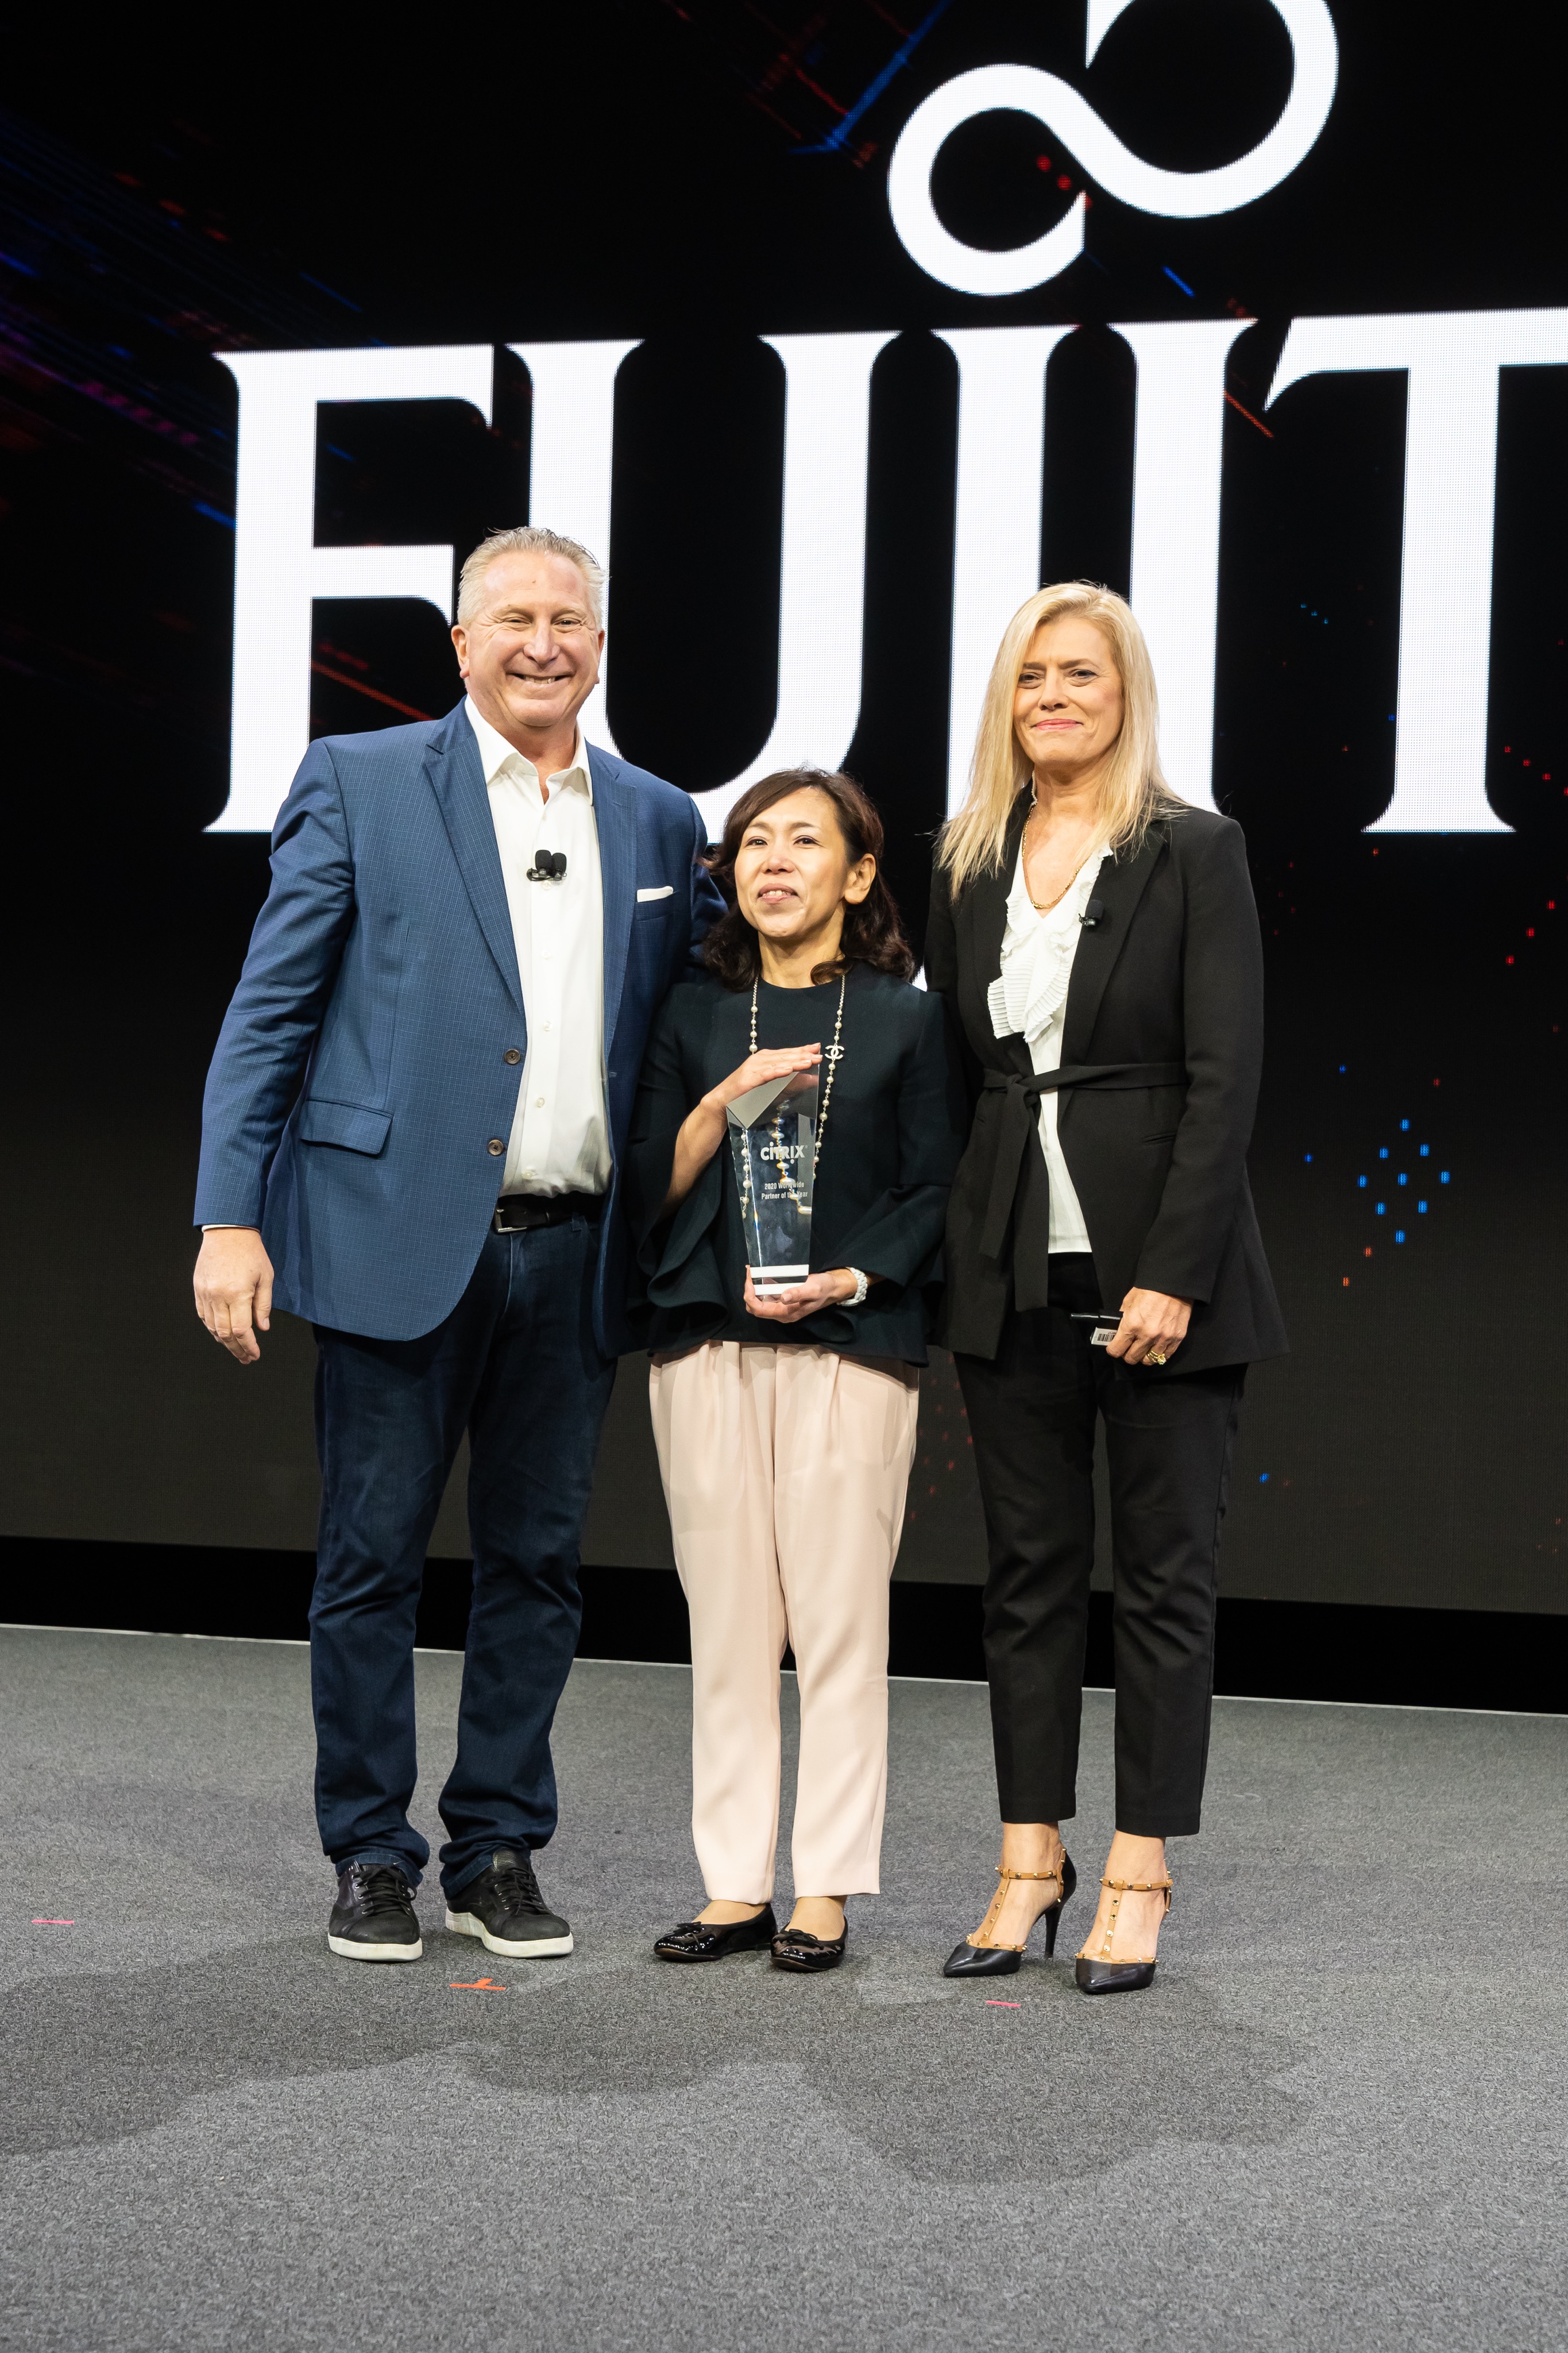 (from left to right)    1. Mark Ferrer EVP, Chief Revenue Officer, Citrix              2. Megumi Shimazu, CEO and EVP, Head of Digital Infrastructure Services Business Group, Fujitsu   3. Bronwyn Hastings, SVP of Worldwide Channel Sales and Ecosystems, Citrix